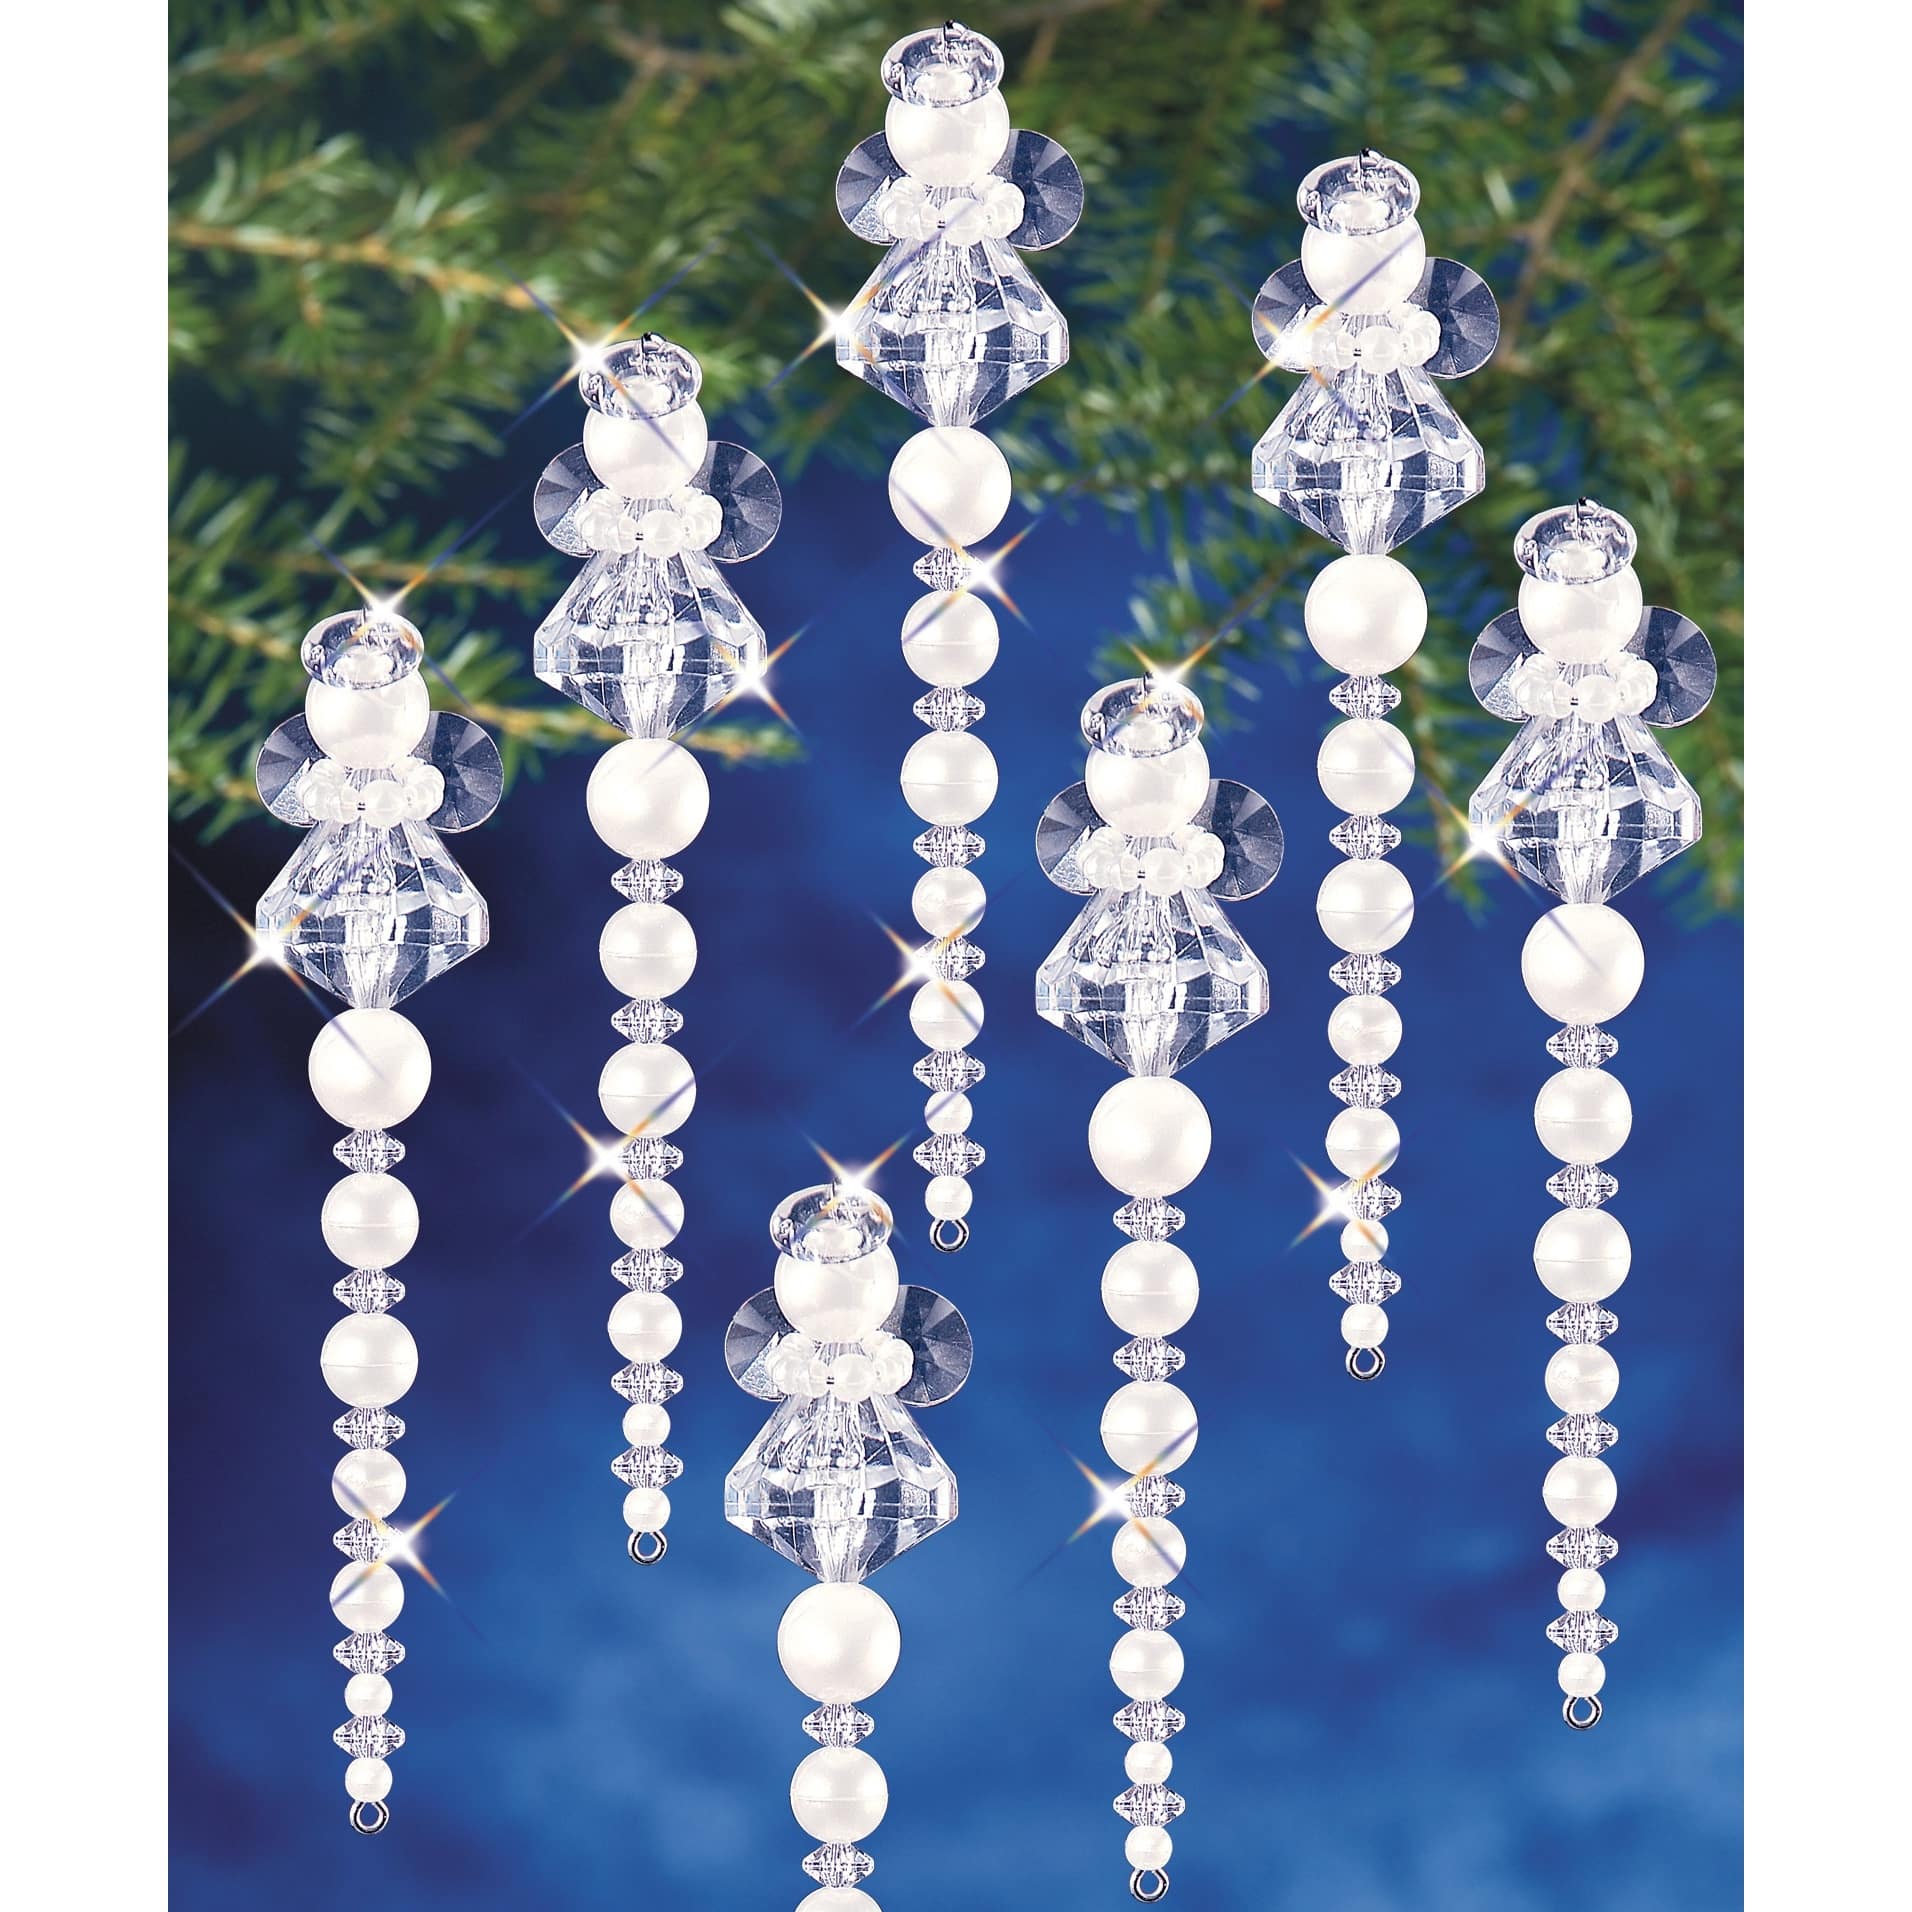 The Beadery&#xAE; Icicle Angel Holiday Beaded Ornament Kit